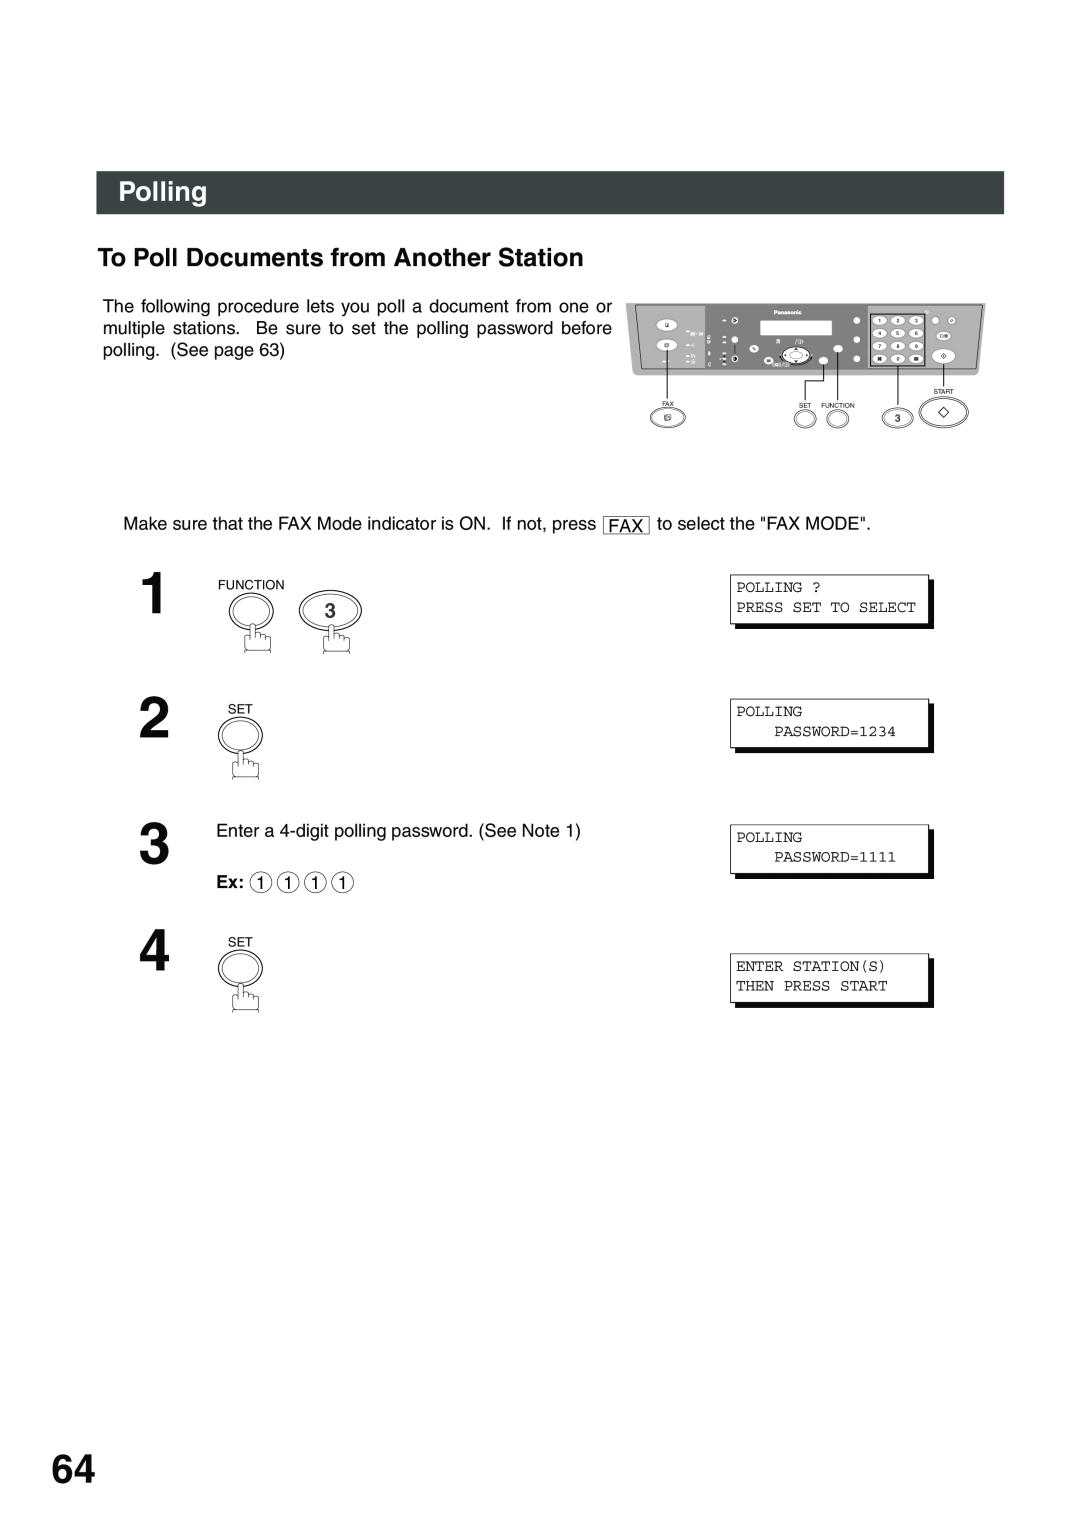 Panasonic DP-135FP To Poll Documents from Another Station, Polling ? Press Set To Select, POLLING PASSWORD=1234 